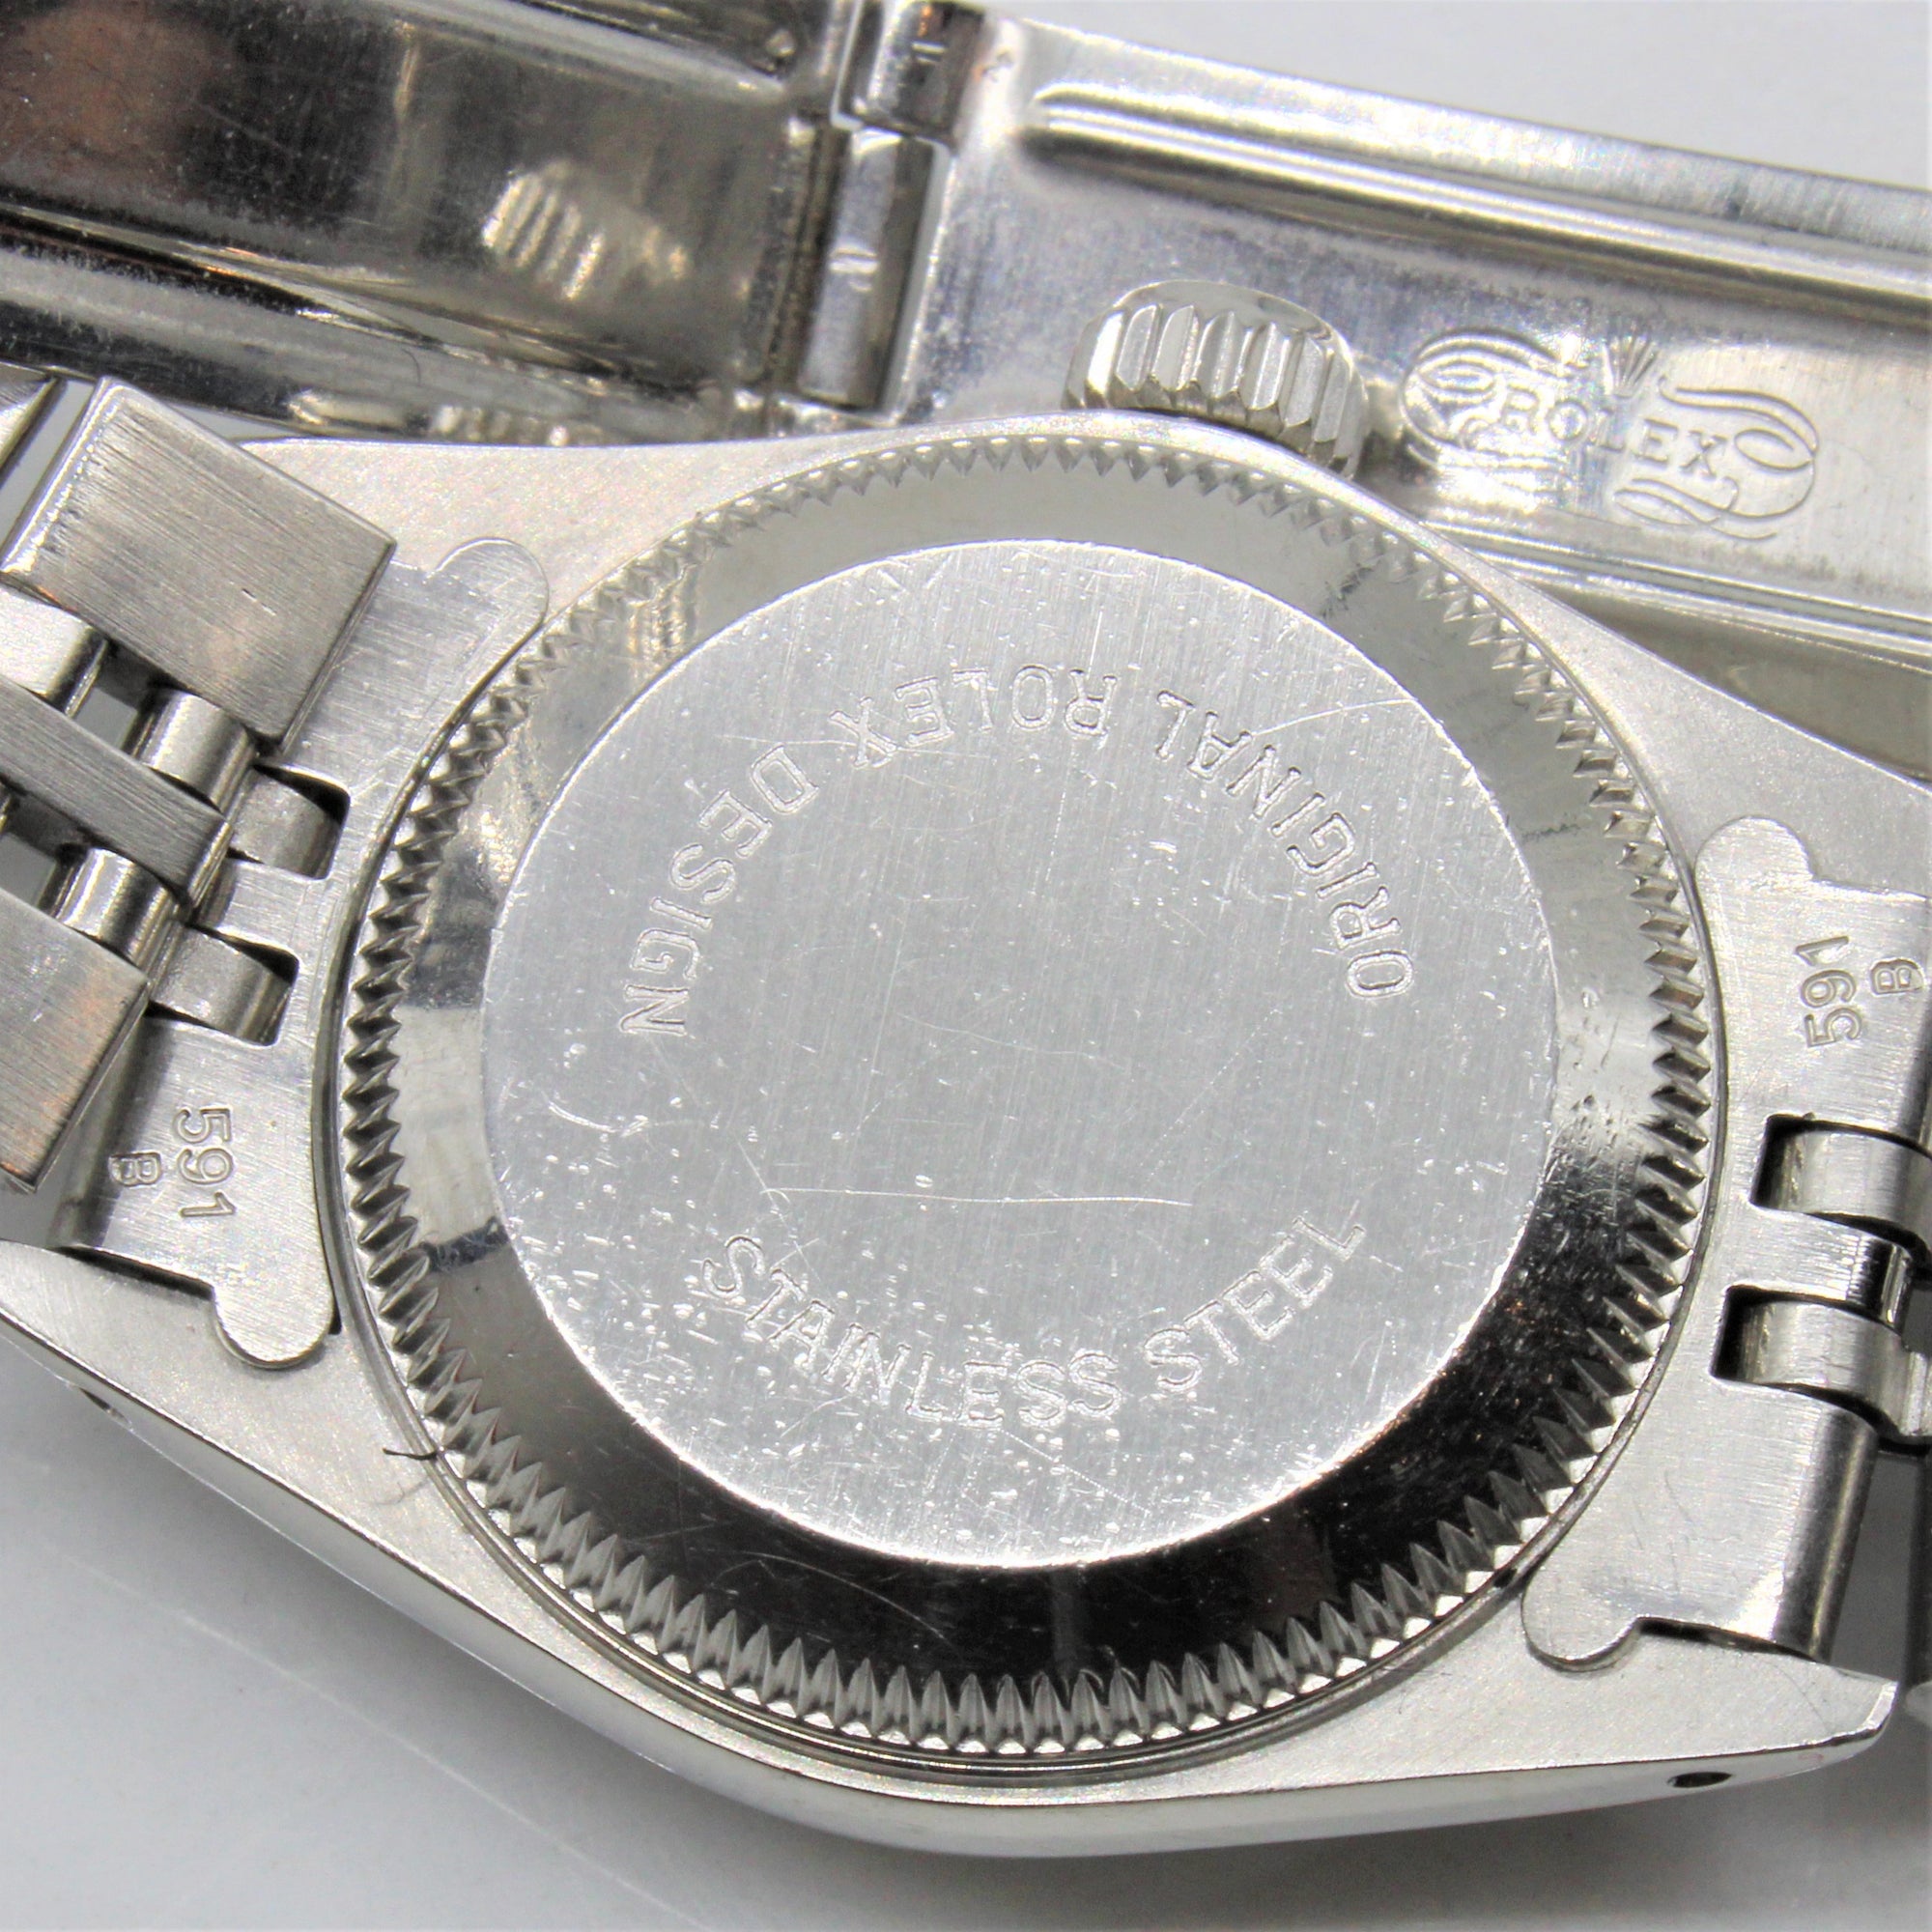 'Rolex' Oyster Perpetual Watch | 7.25